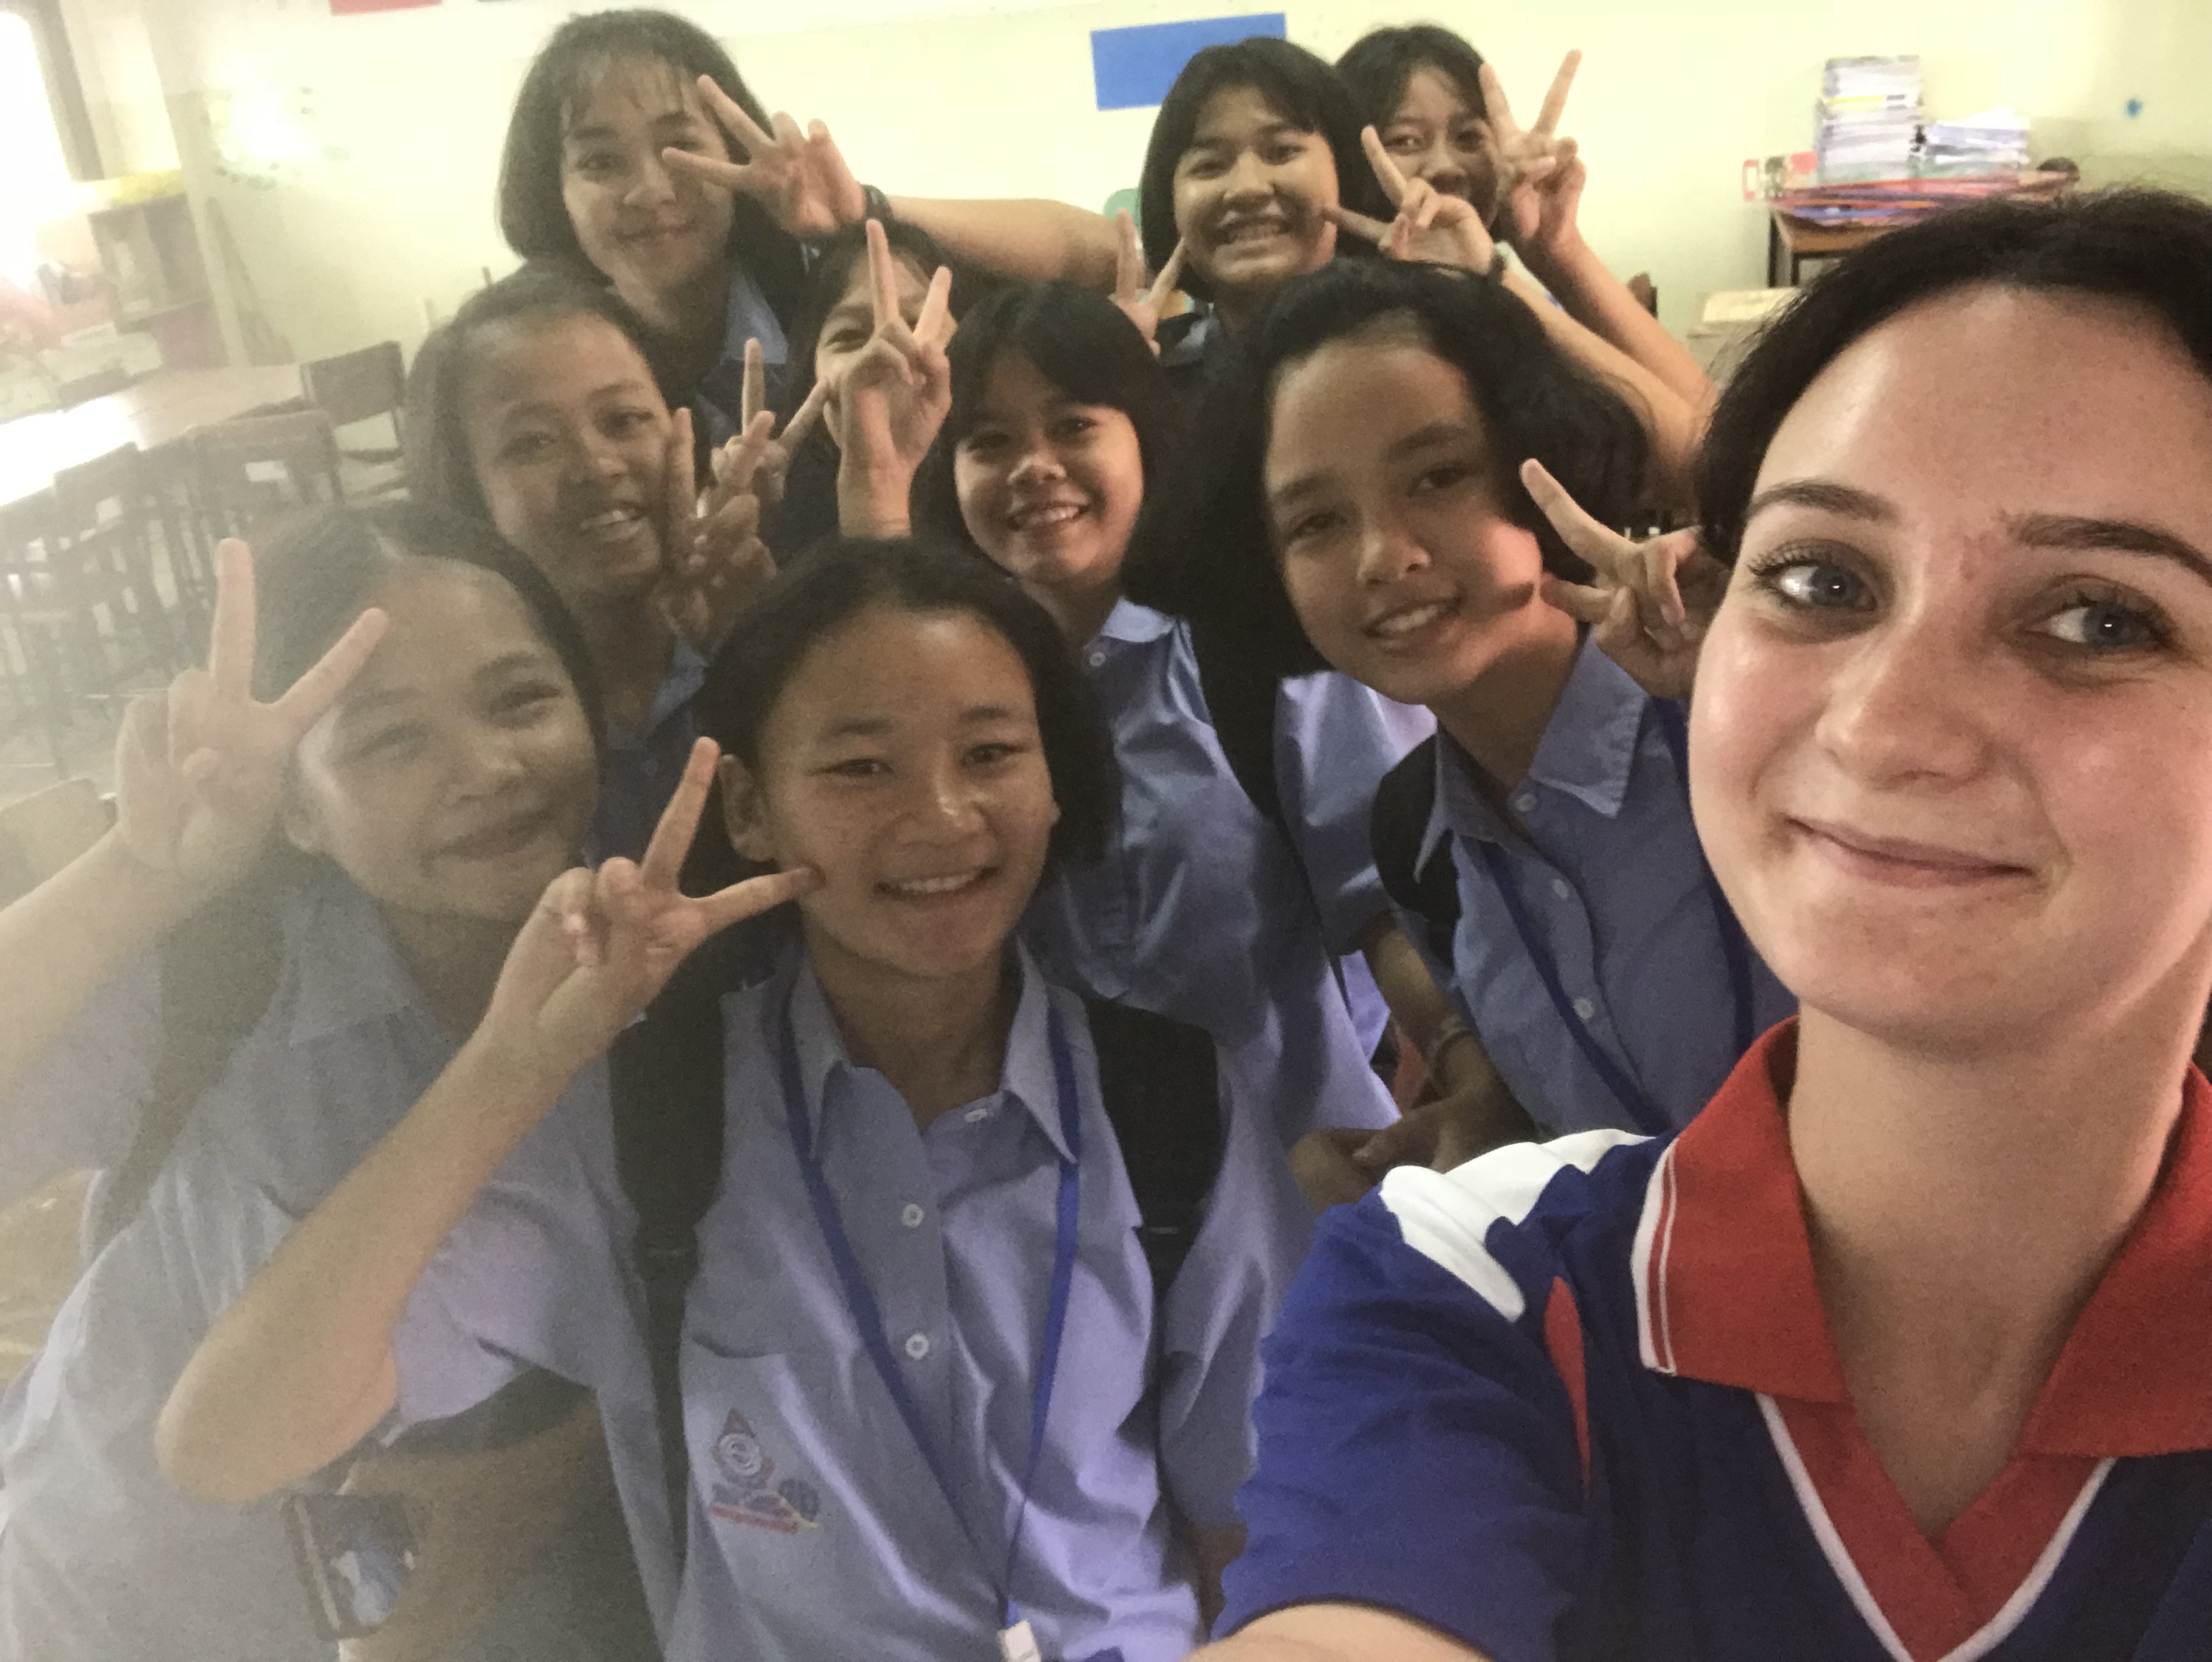 Jenny taking a selfie with her students.